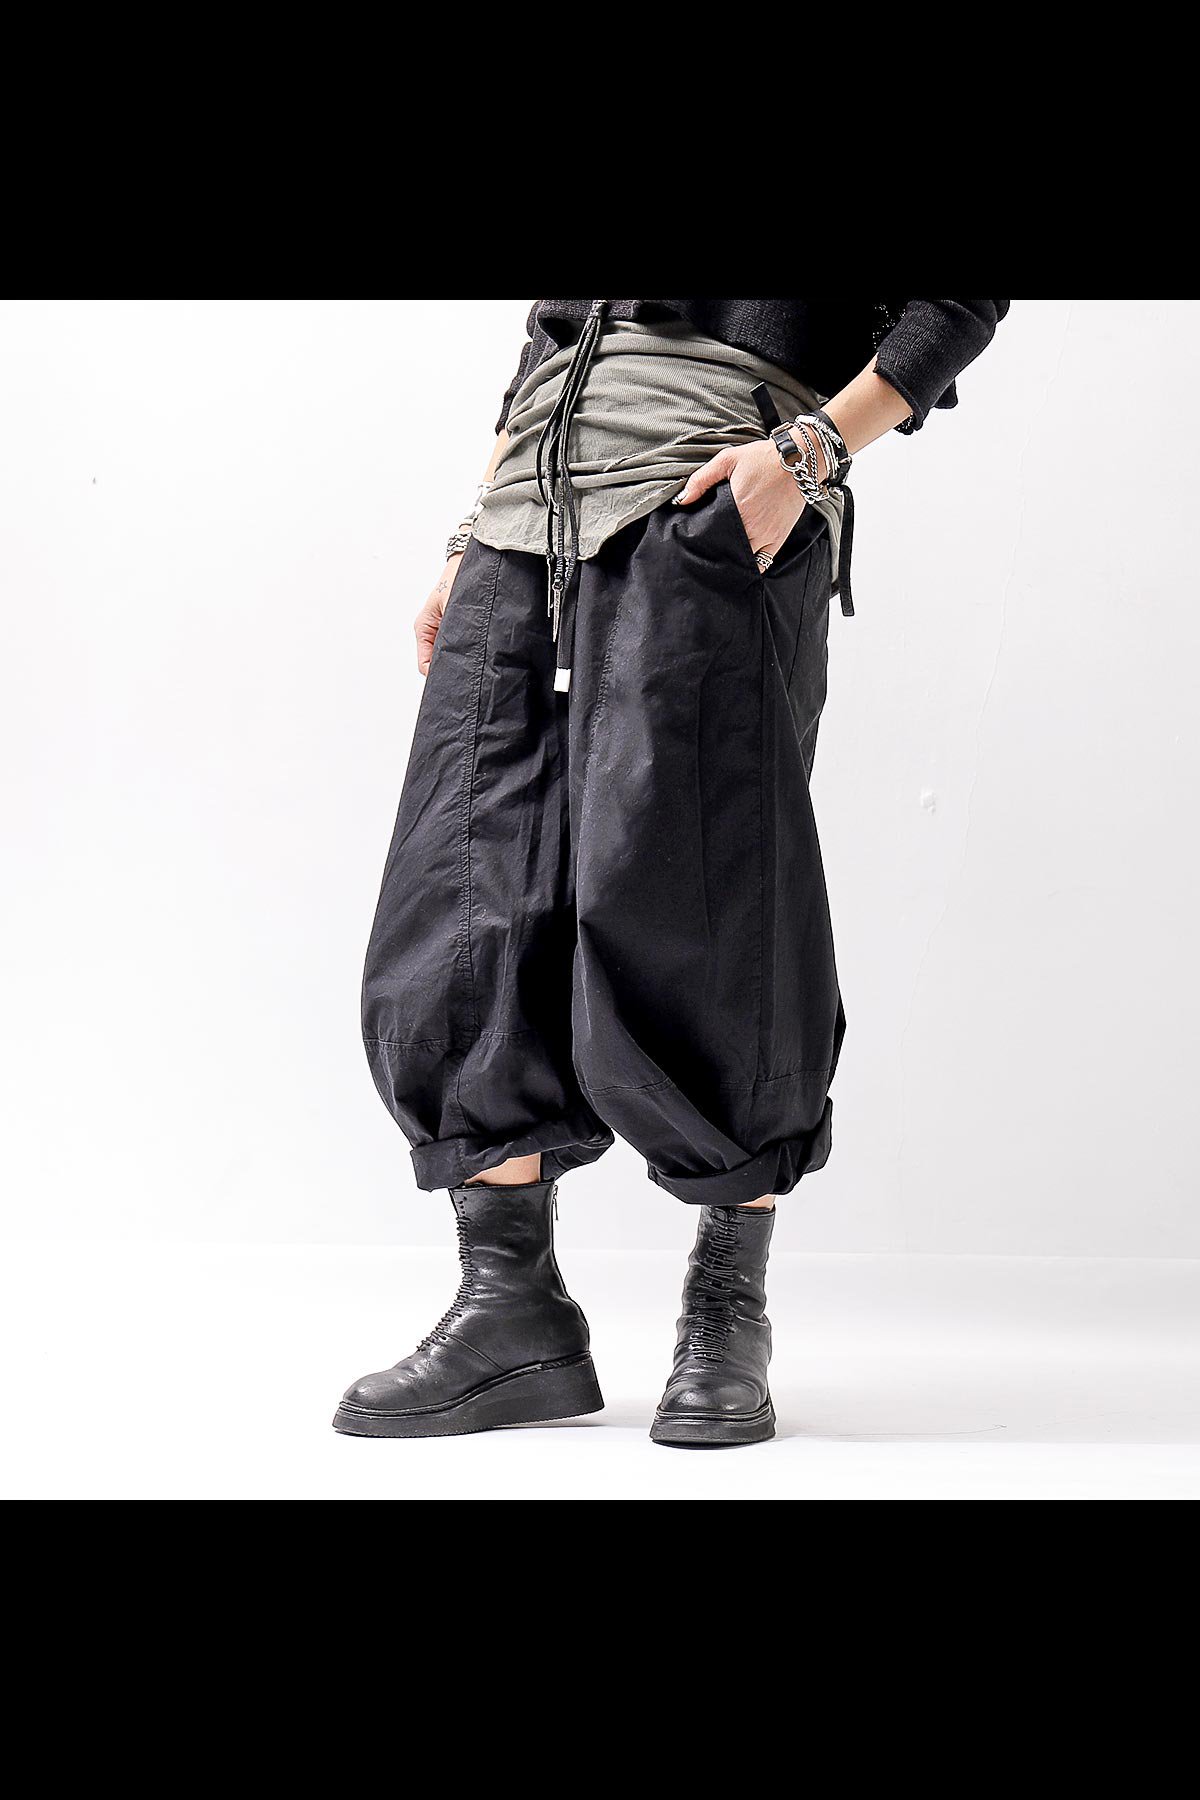 <img class='new_mark_img1' src='https://img.shop-pro.jp/img/new/icons8.gif' style='border:none;display:inline;margin:0px;padding:0px;width:auto;' />UNISEX EASY COTTON PANTS 335 0102_BLACK